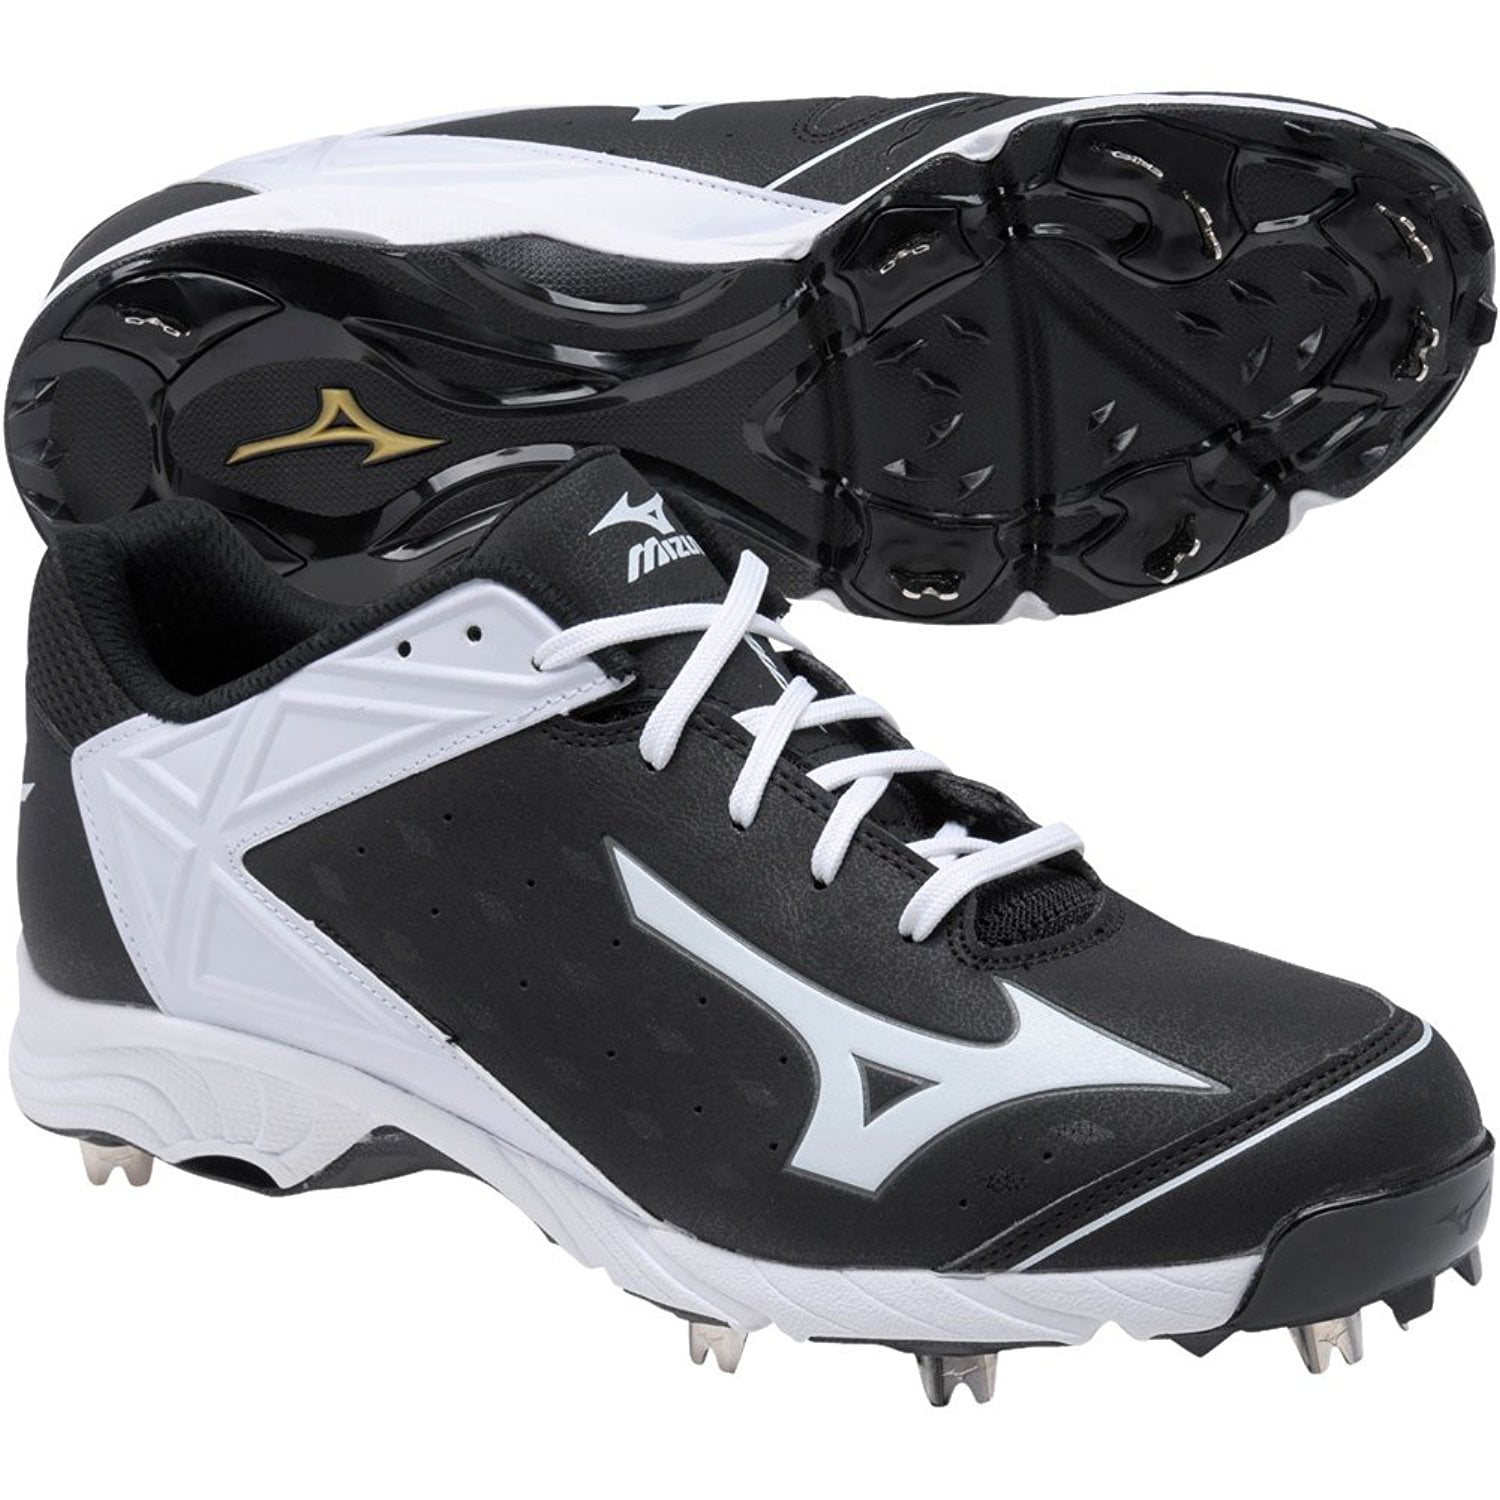 NEW MIZUNO 9-SPIKE ADV. SWAGGER 2 MID BASEBALL CLEATS MENS 12 M SPIKES SHOES